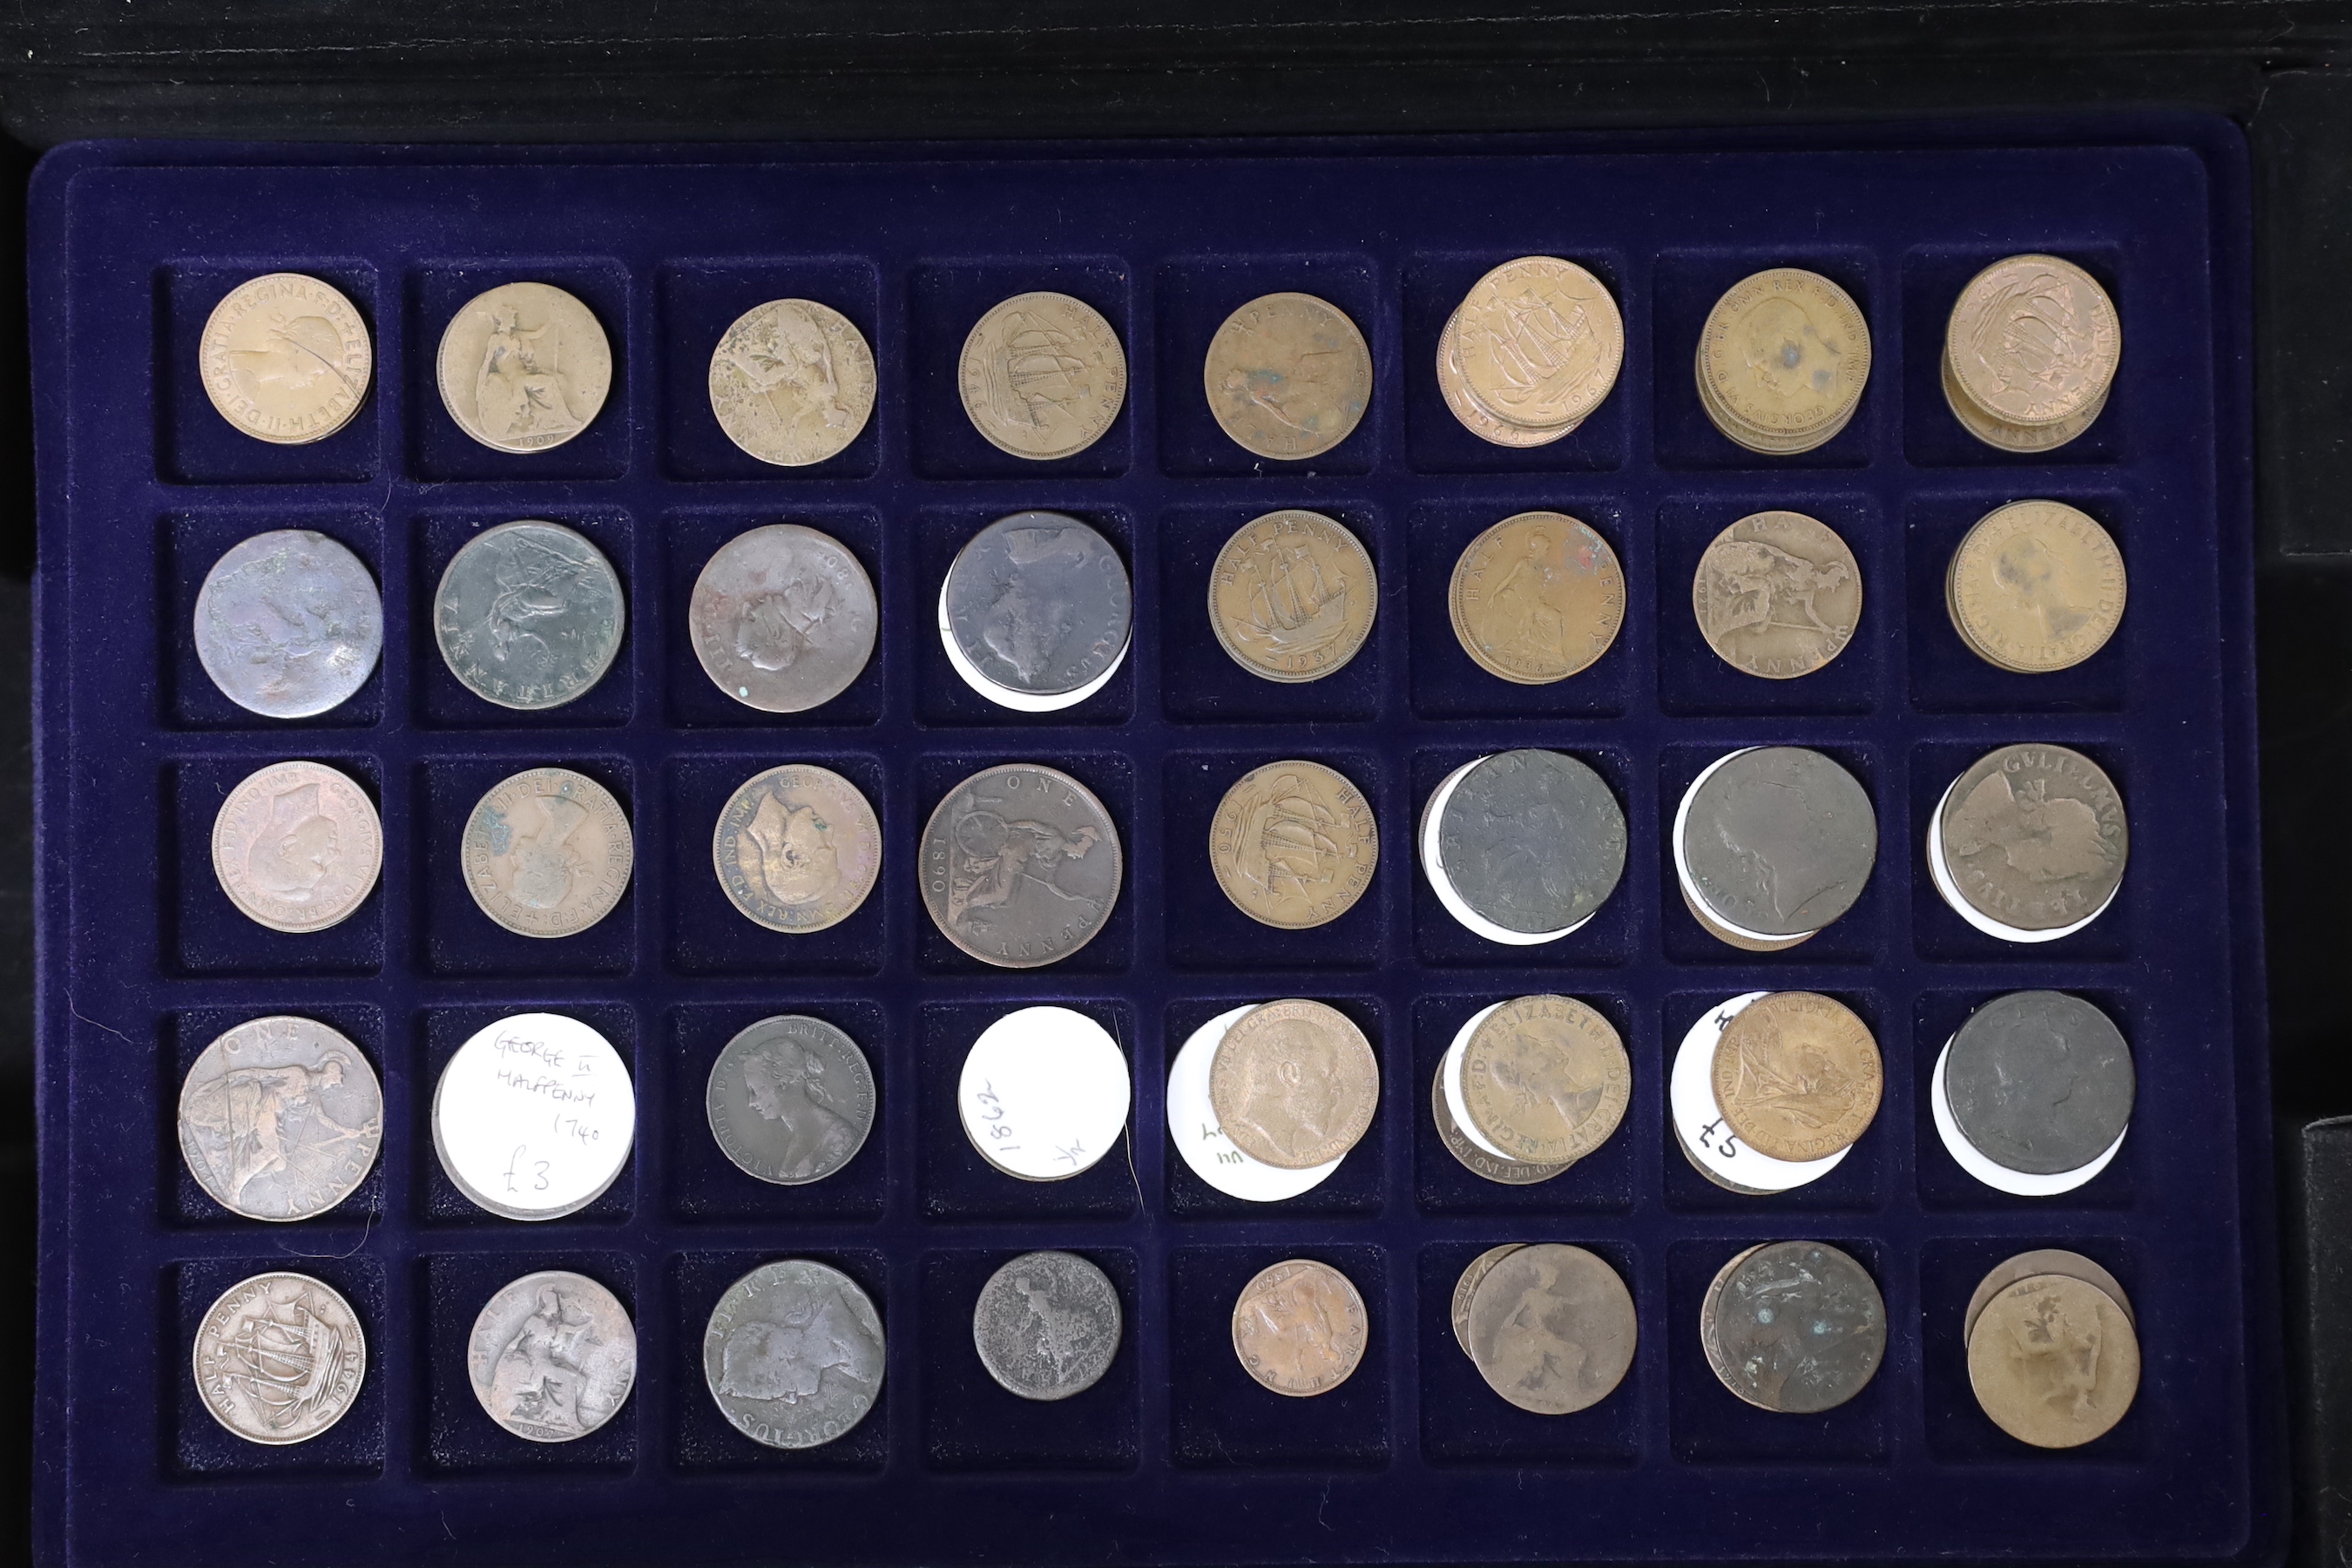 UK coins, a case of mostly George III to Victoria farthings and various pennies, half pennies etc                                                                                                                           